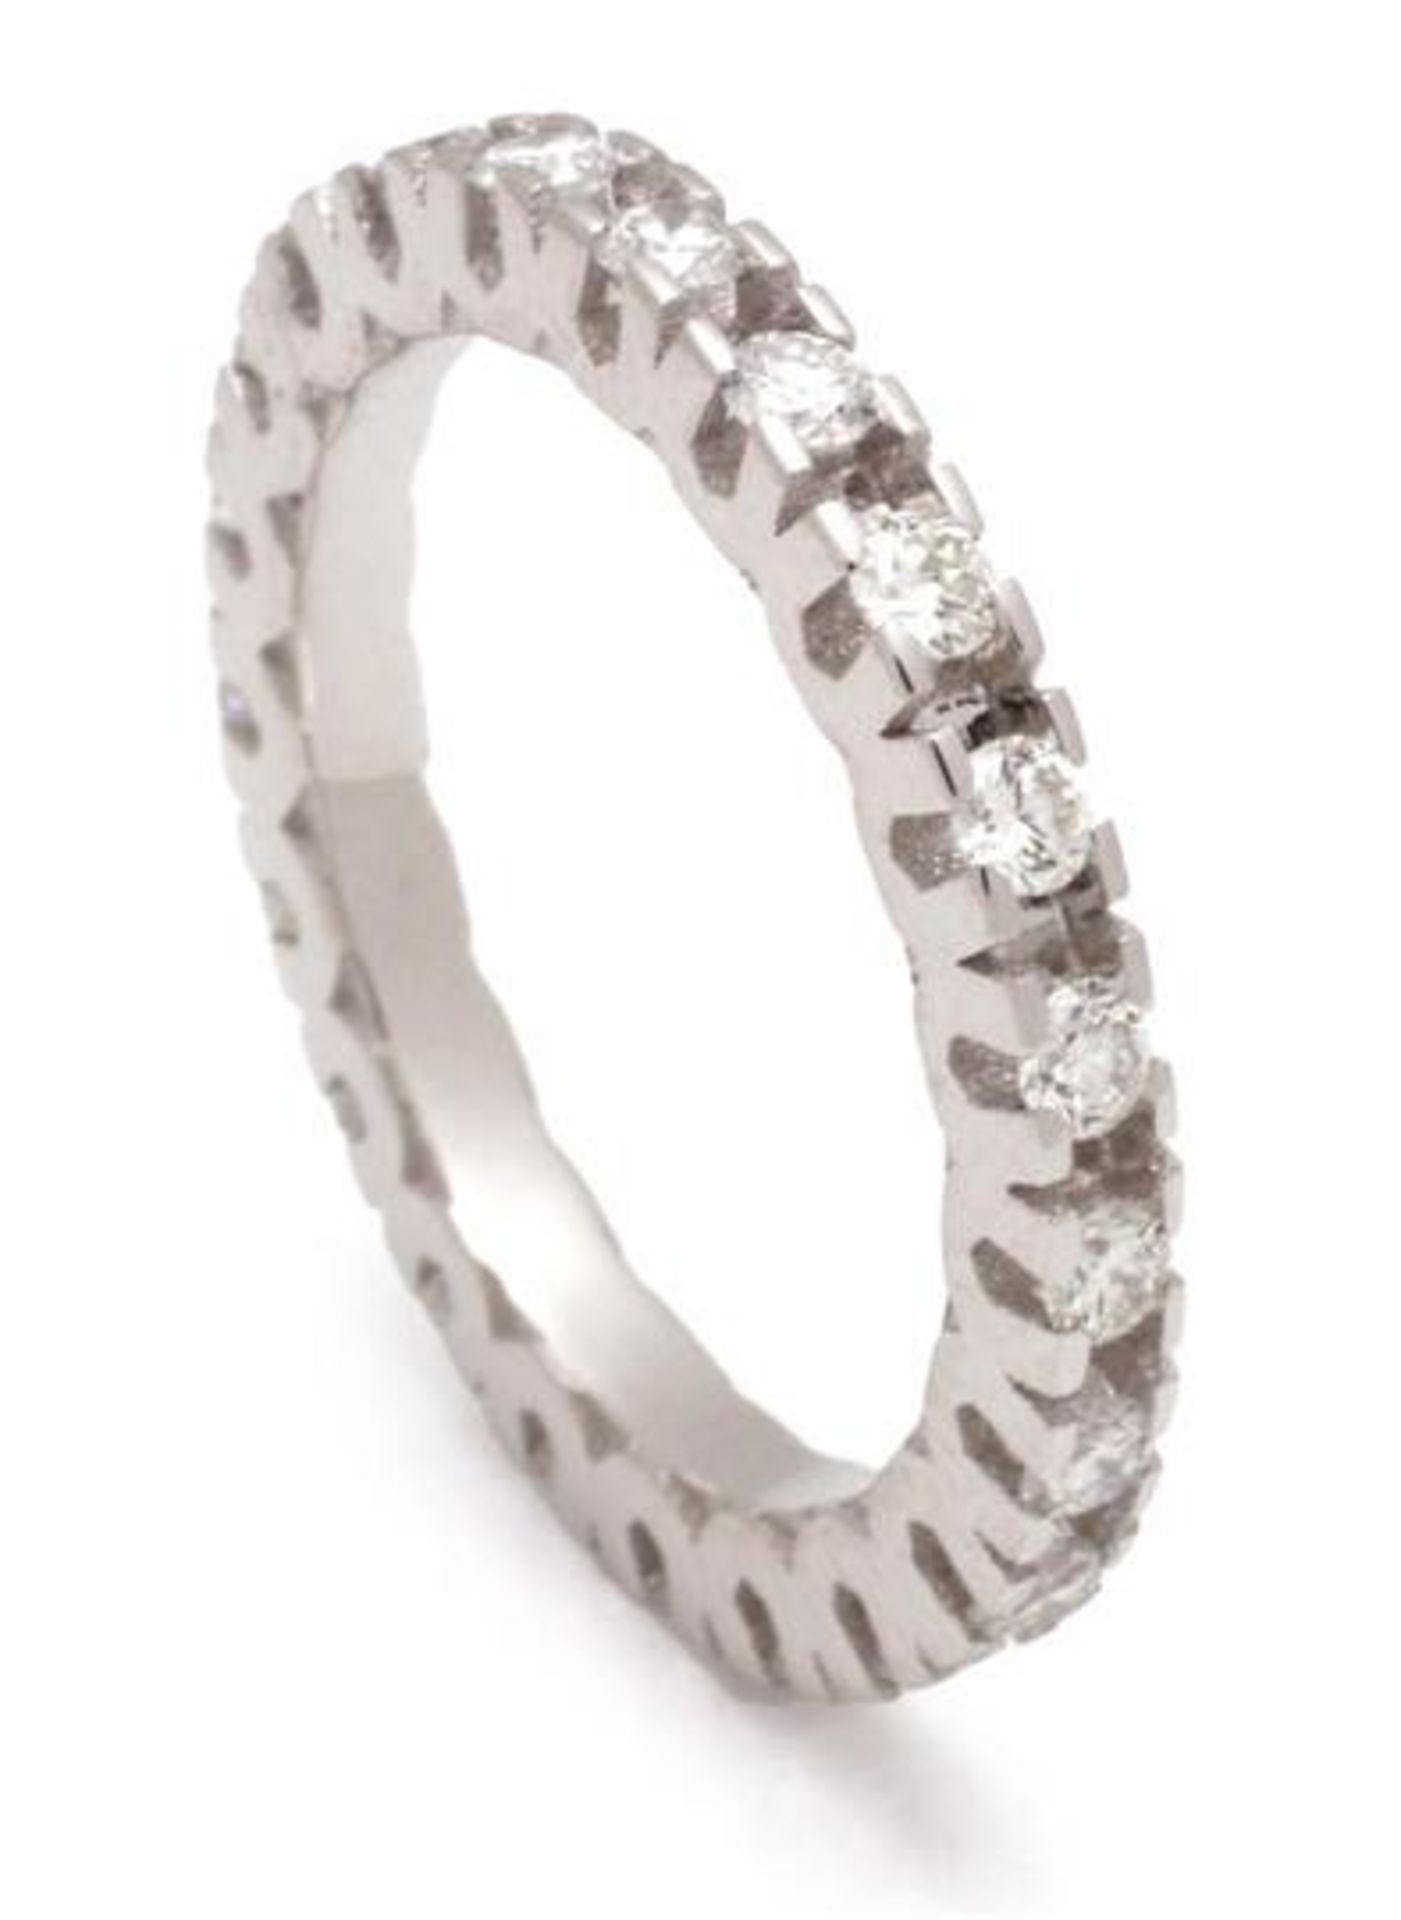 White gold alliance ring, 18 kt, set with brilliant cut diamond, approx. 0.90 ct, 17.5 mm